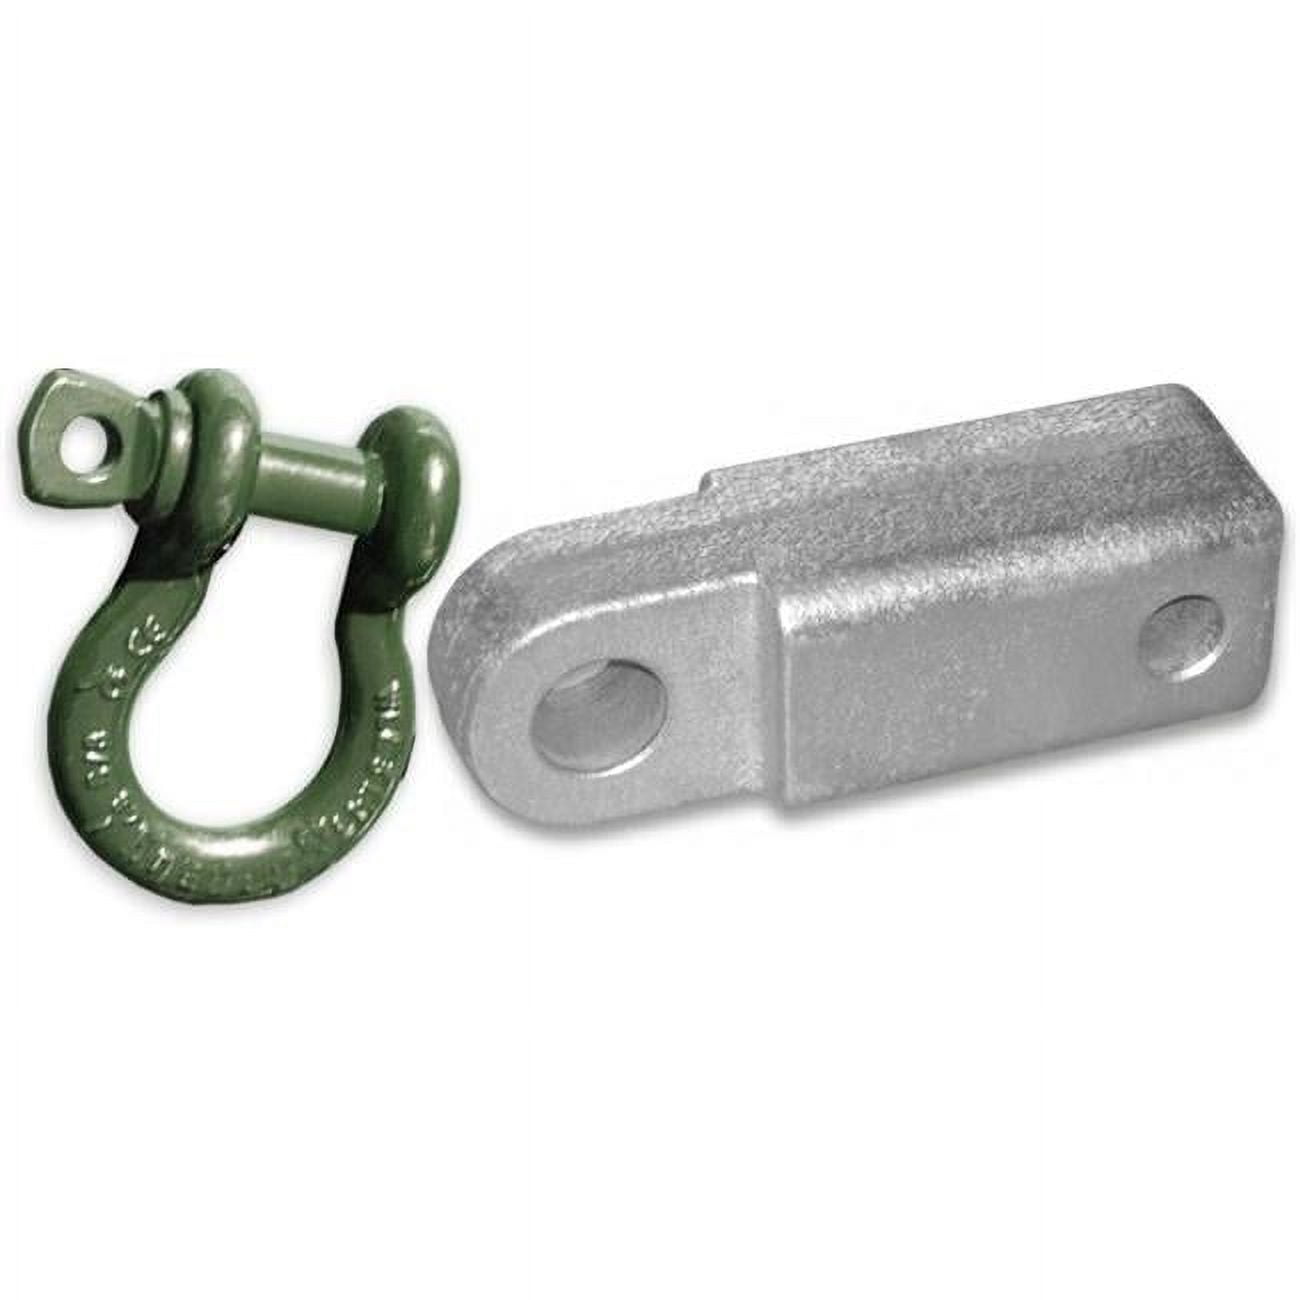 Picture of 2 inch Steel Receiver Bracket w/ OD GREEN Powdercoated D-Shackle (OFF-ROAD RECOVERY)